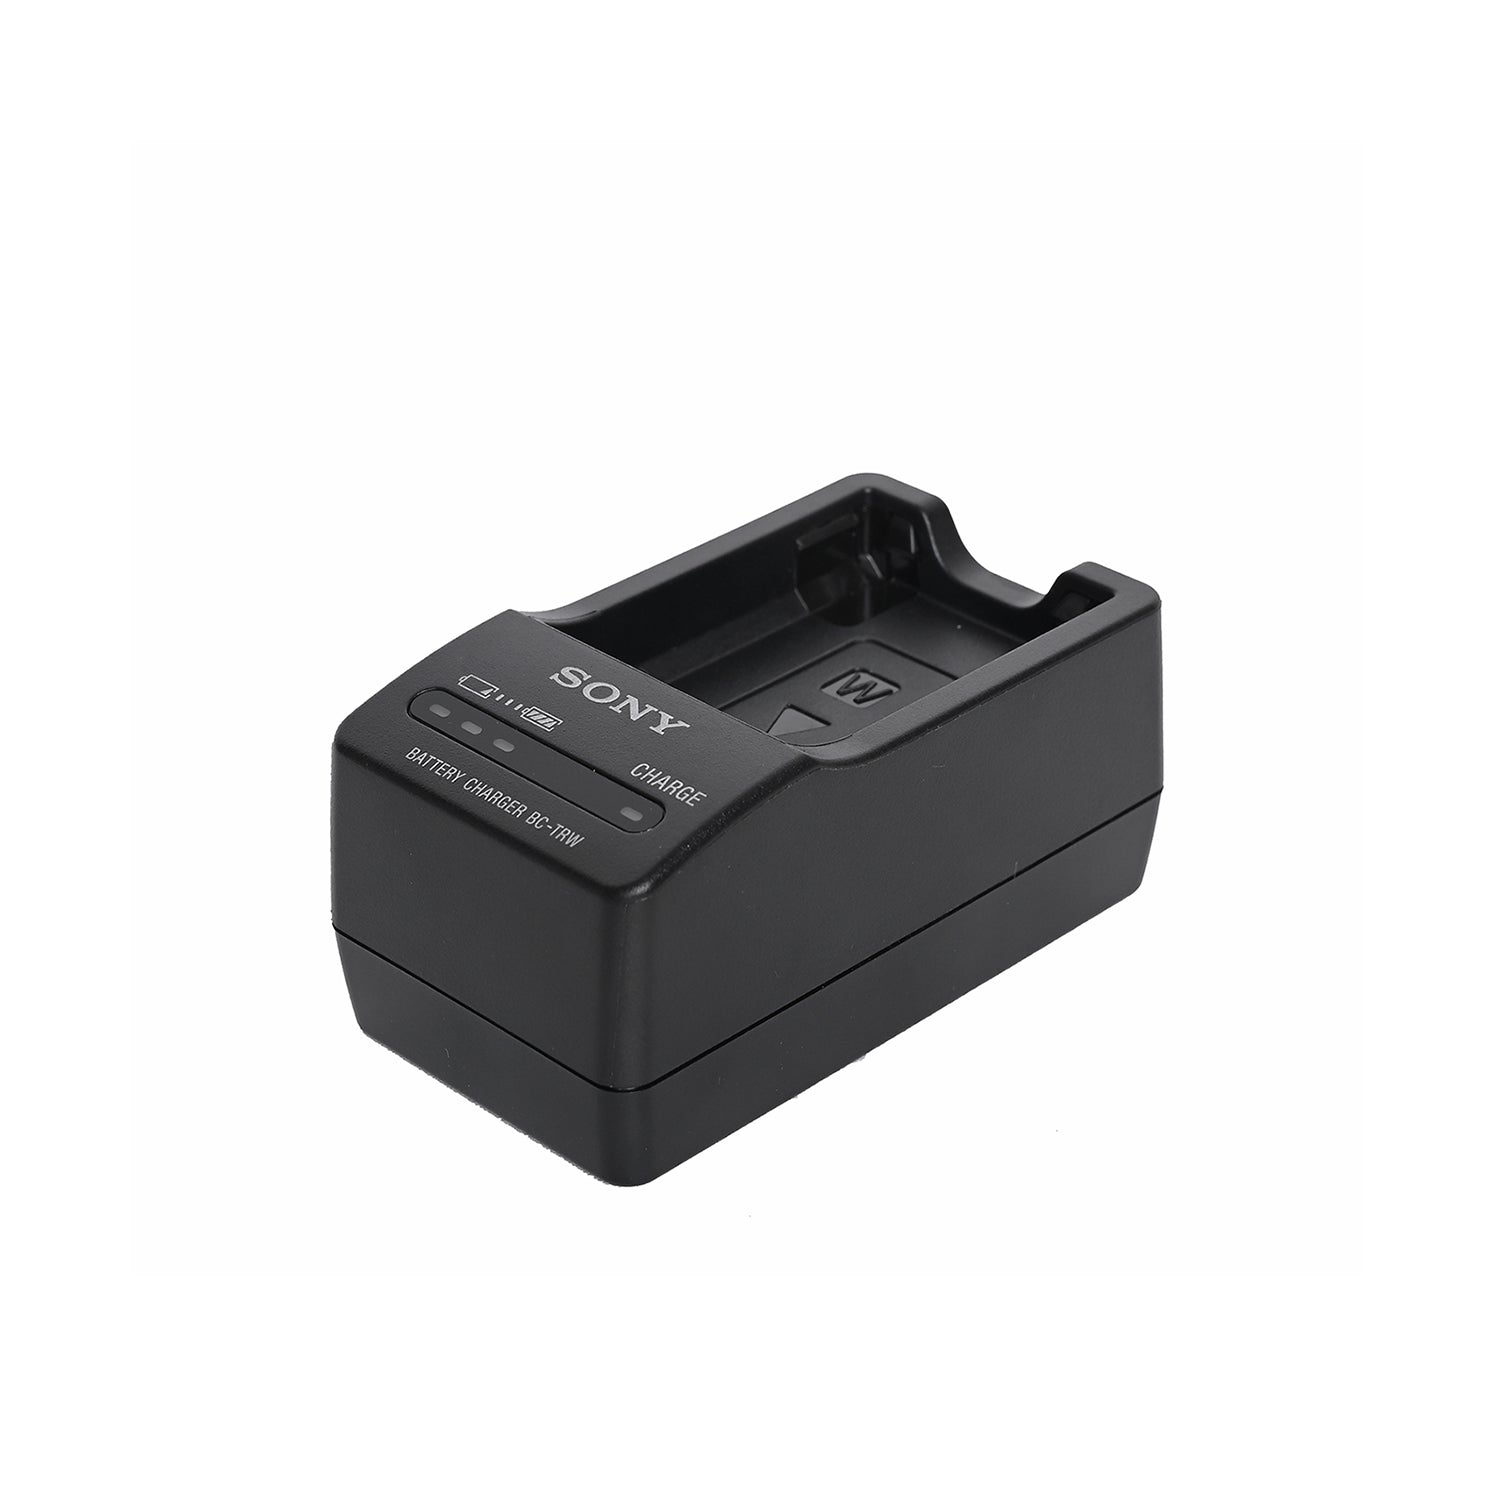 Sony Battery Charger BC-TRW